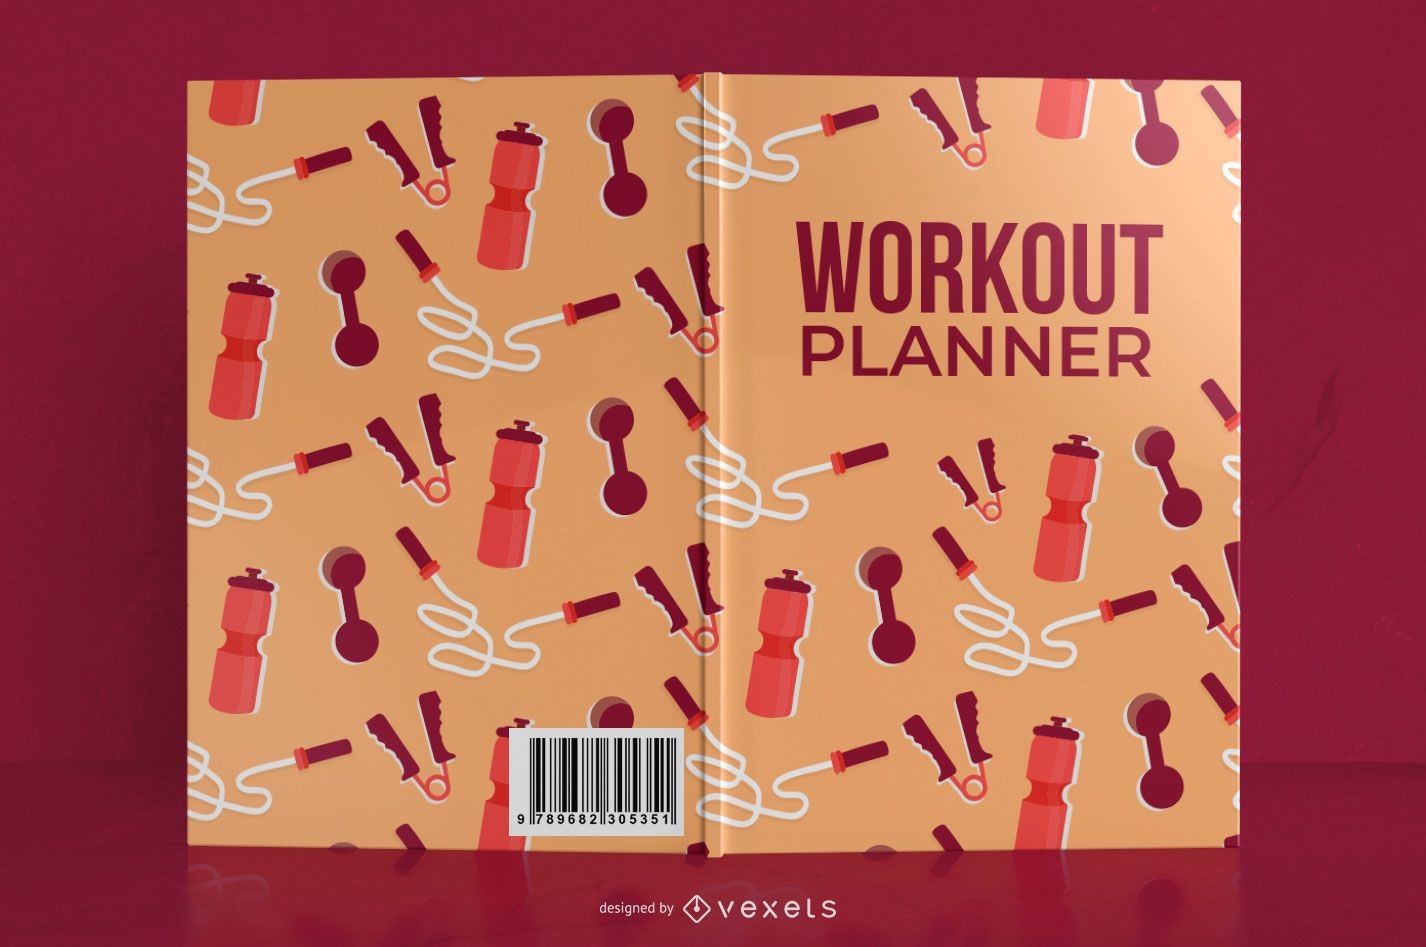 My workout planner book cover design